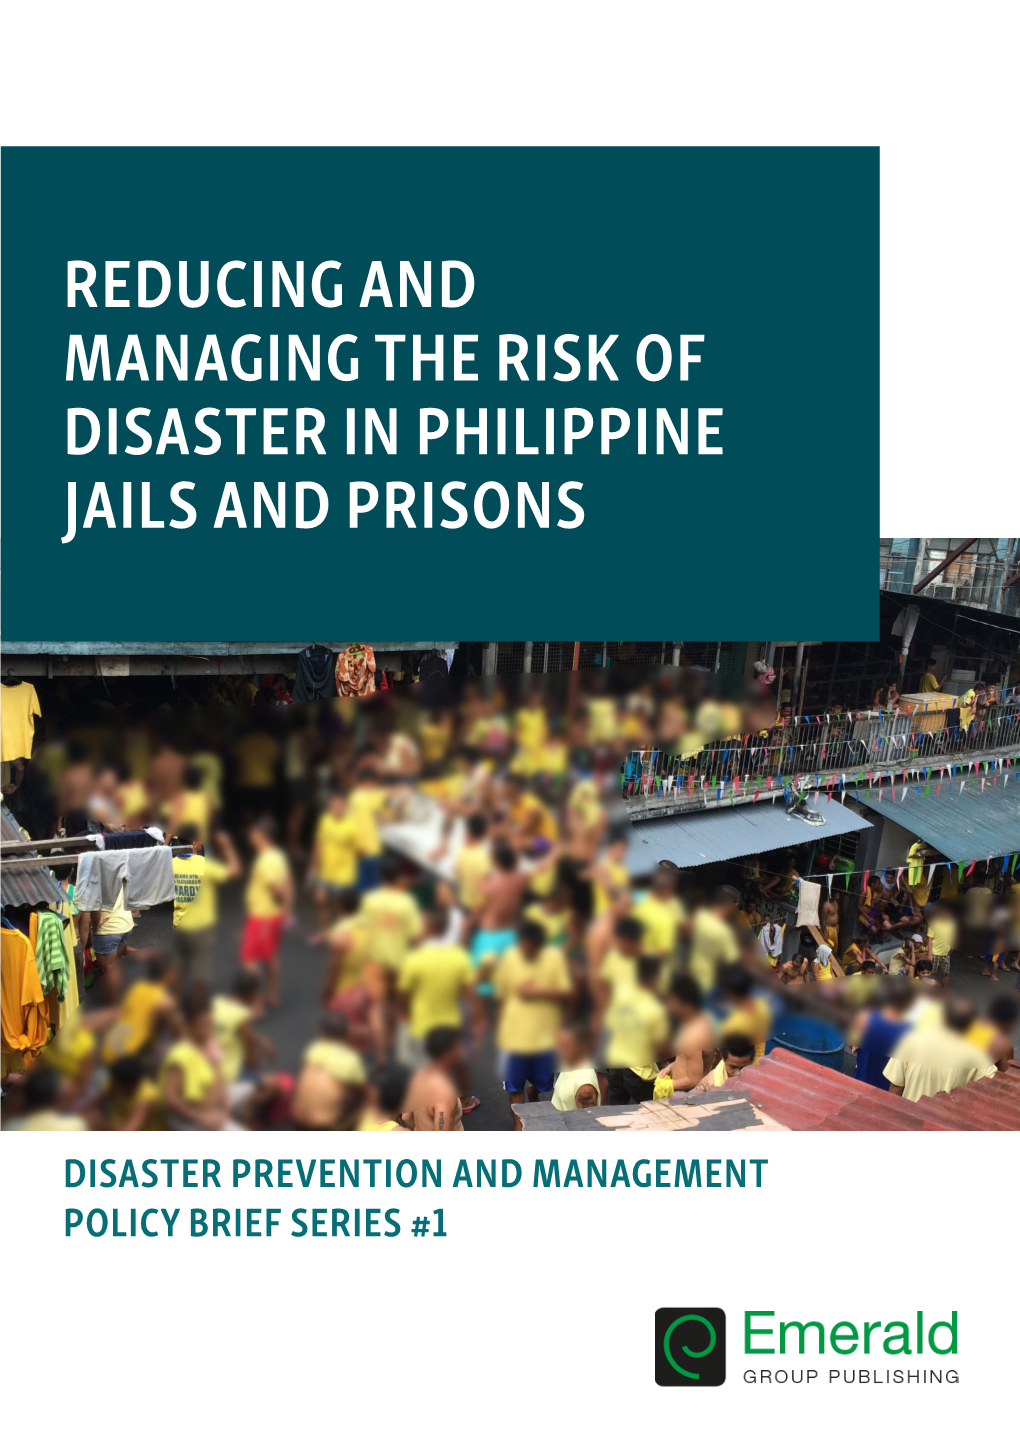 Reducing and Managing the Risk of Disaster in Philippine Jails and Prisons